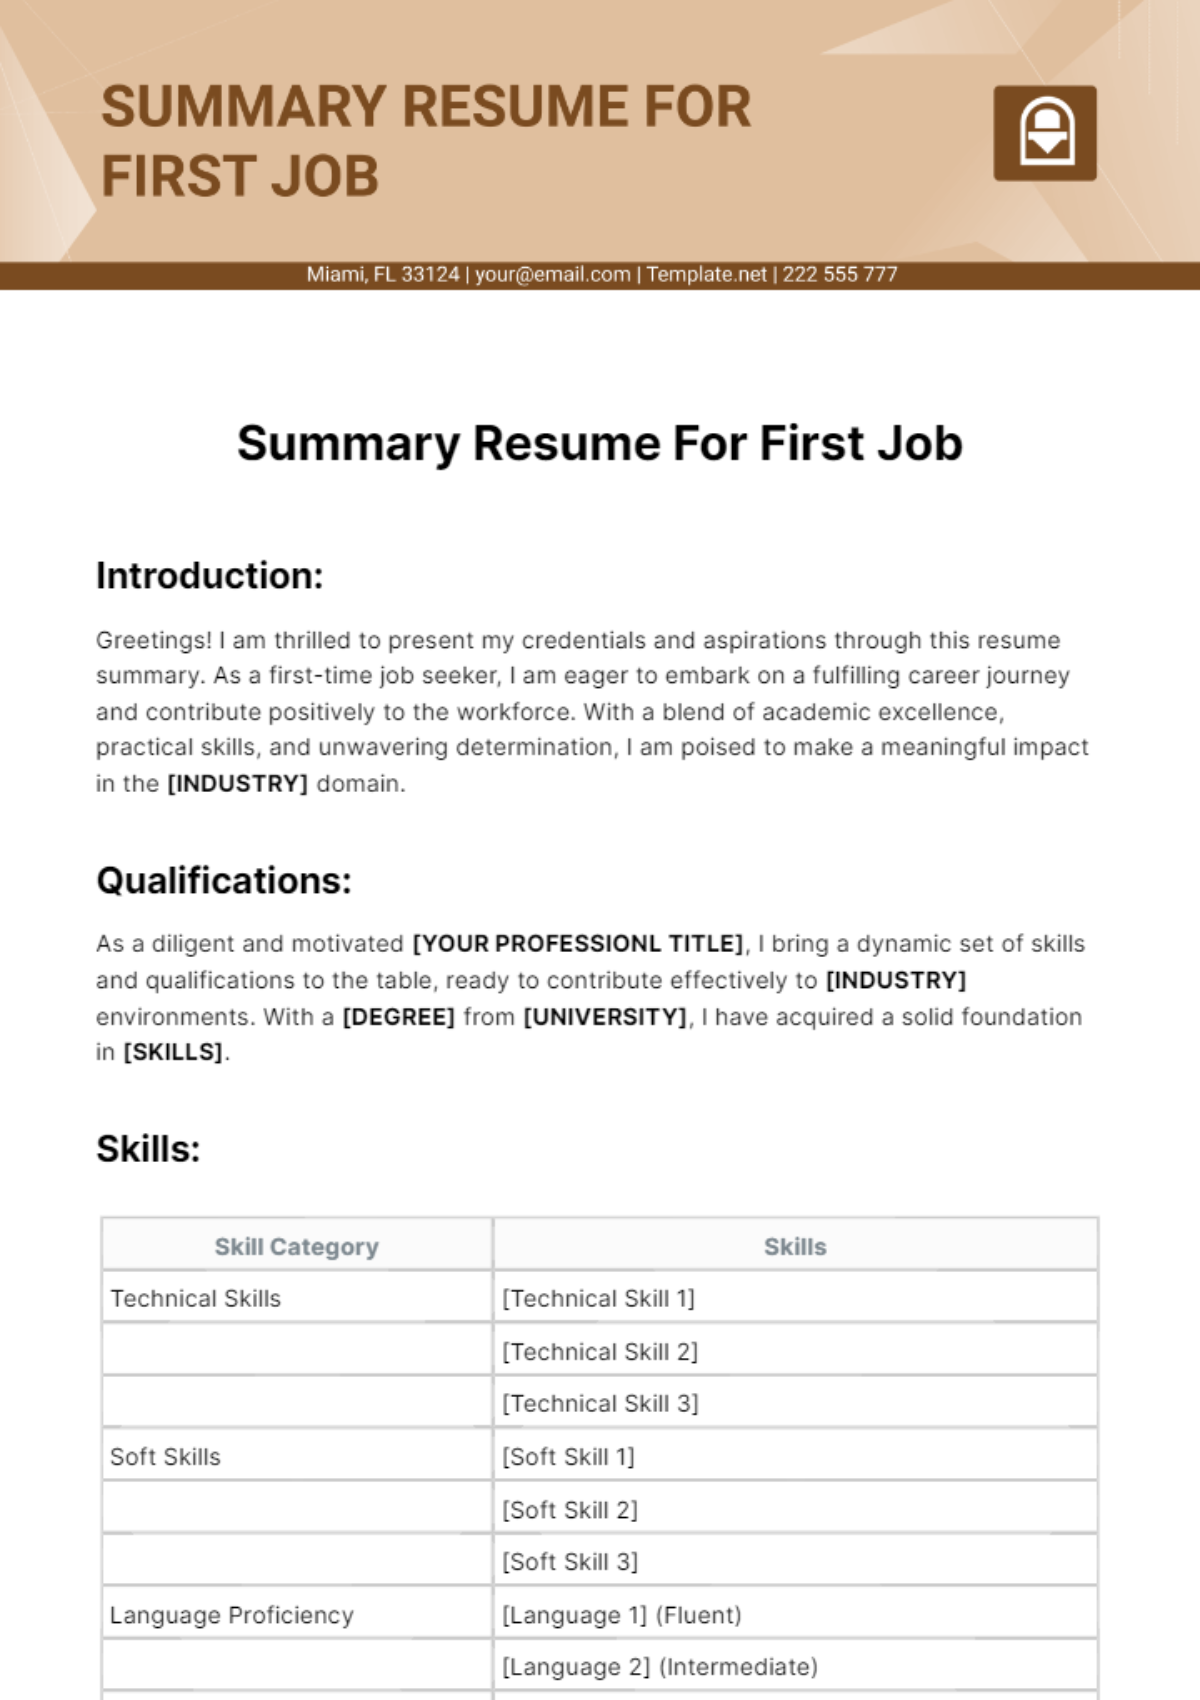 Summary Resume For First Job Template